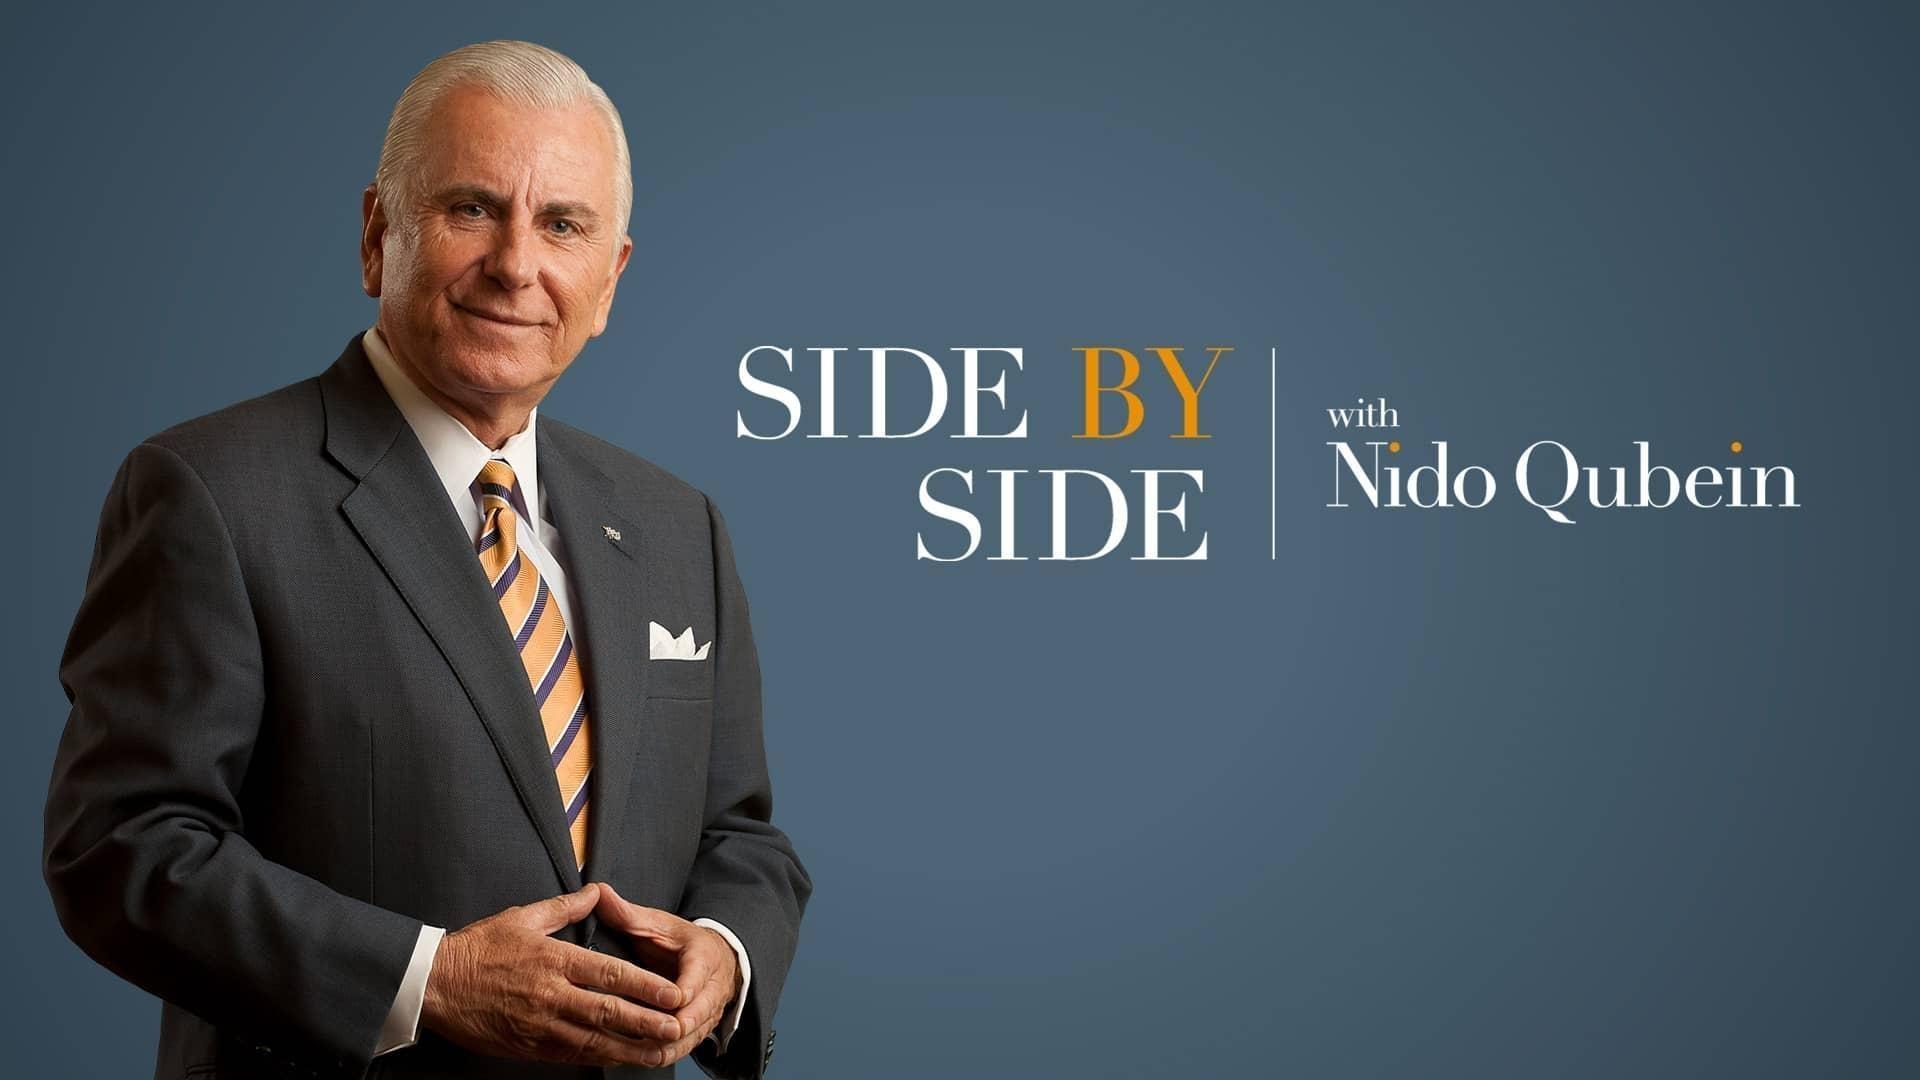 Side by side with Nido Qubein